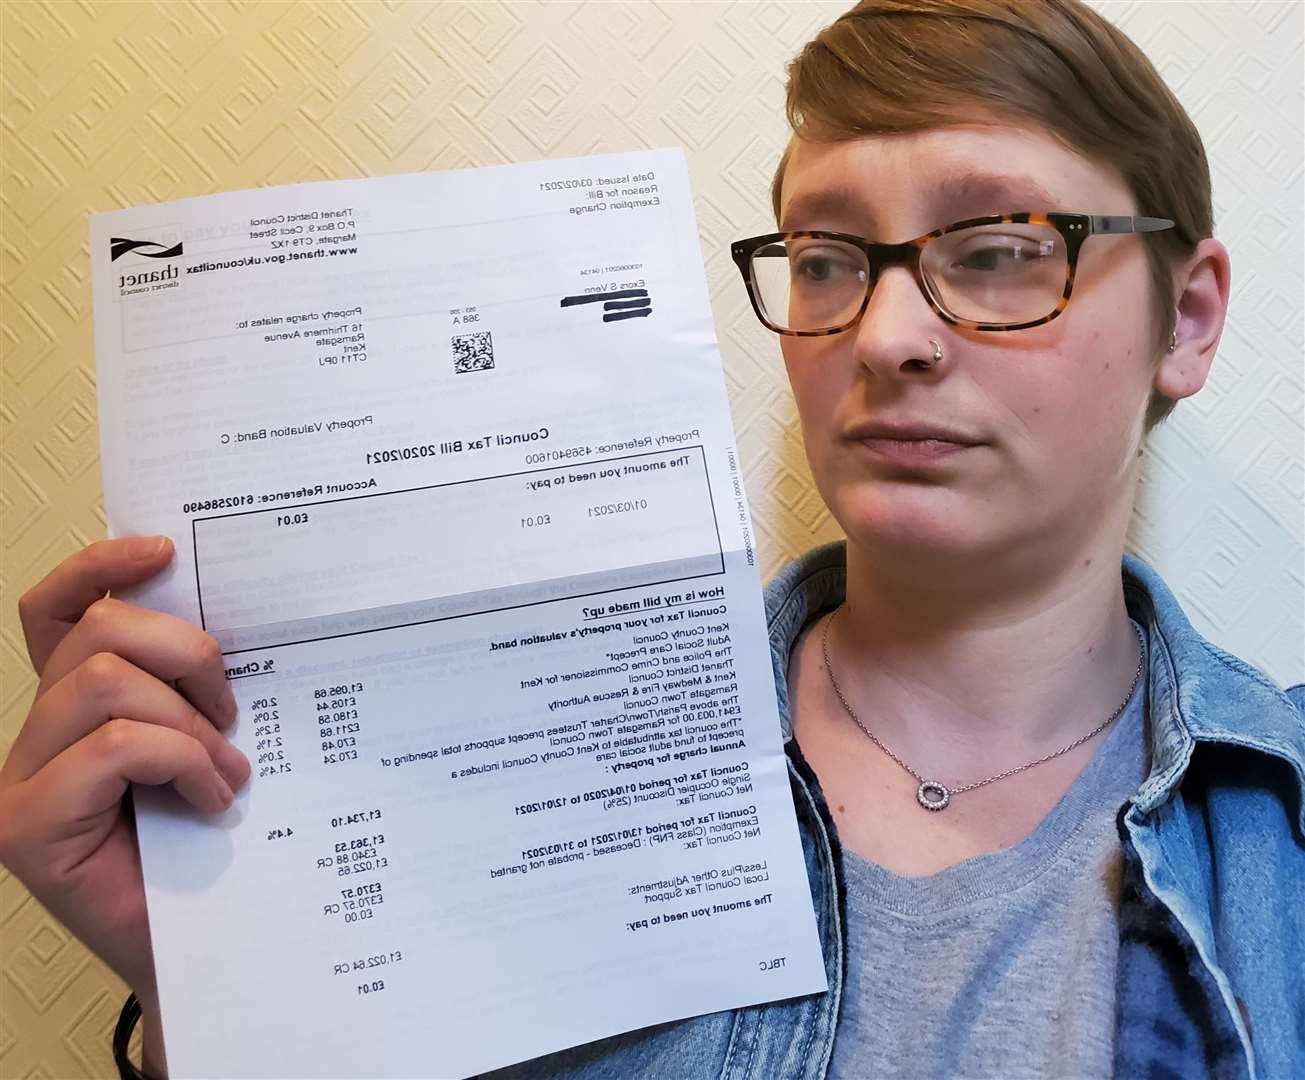 Ms Venn says she was filled with anger when she received the bill from Thanet District Council